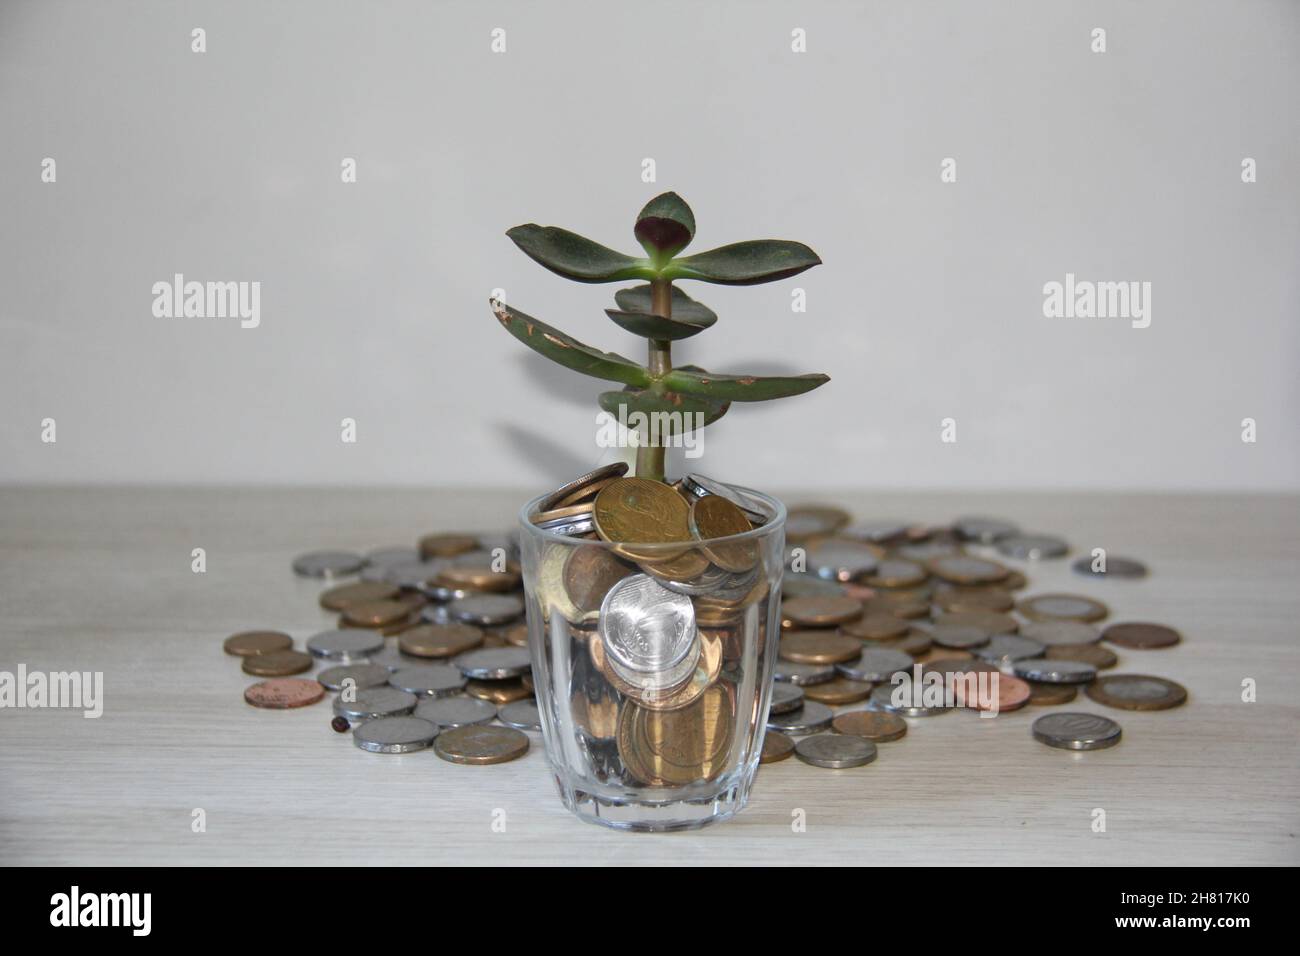 Glass vase with a jade plant and blurred background coins on a wooden table. Stock Photo